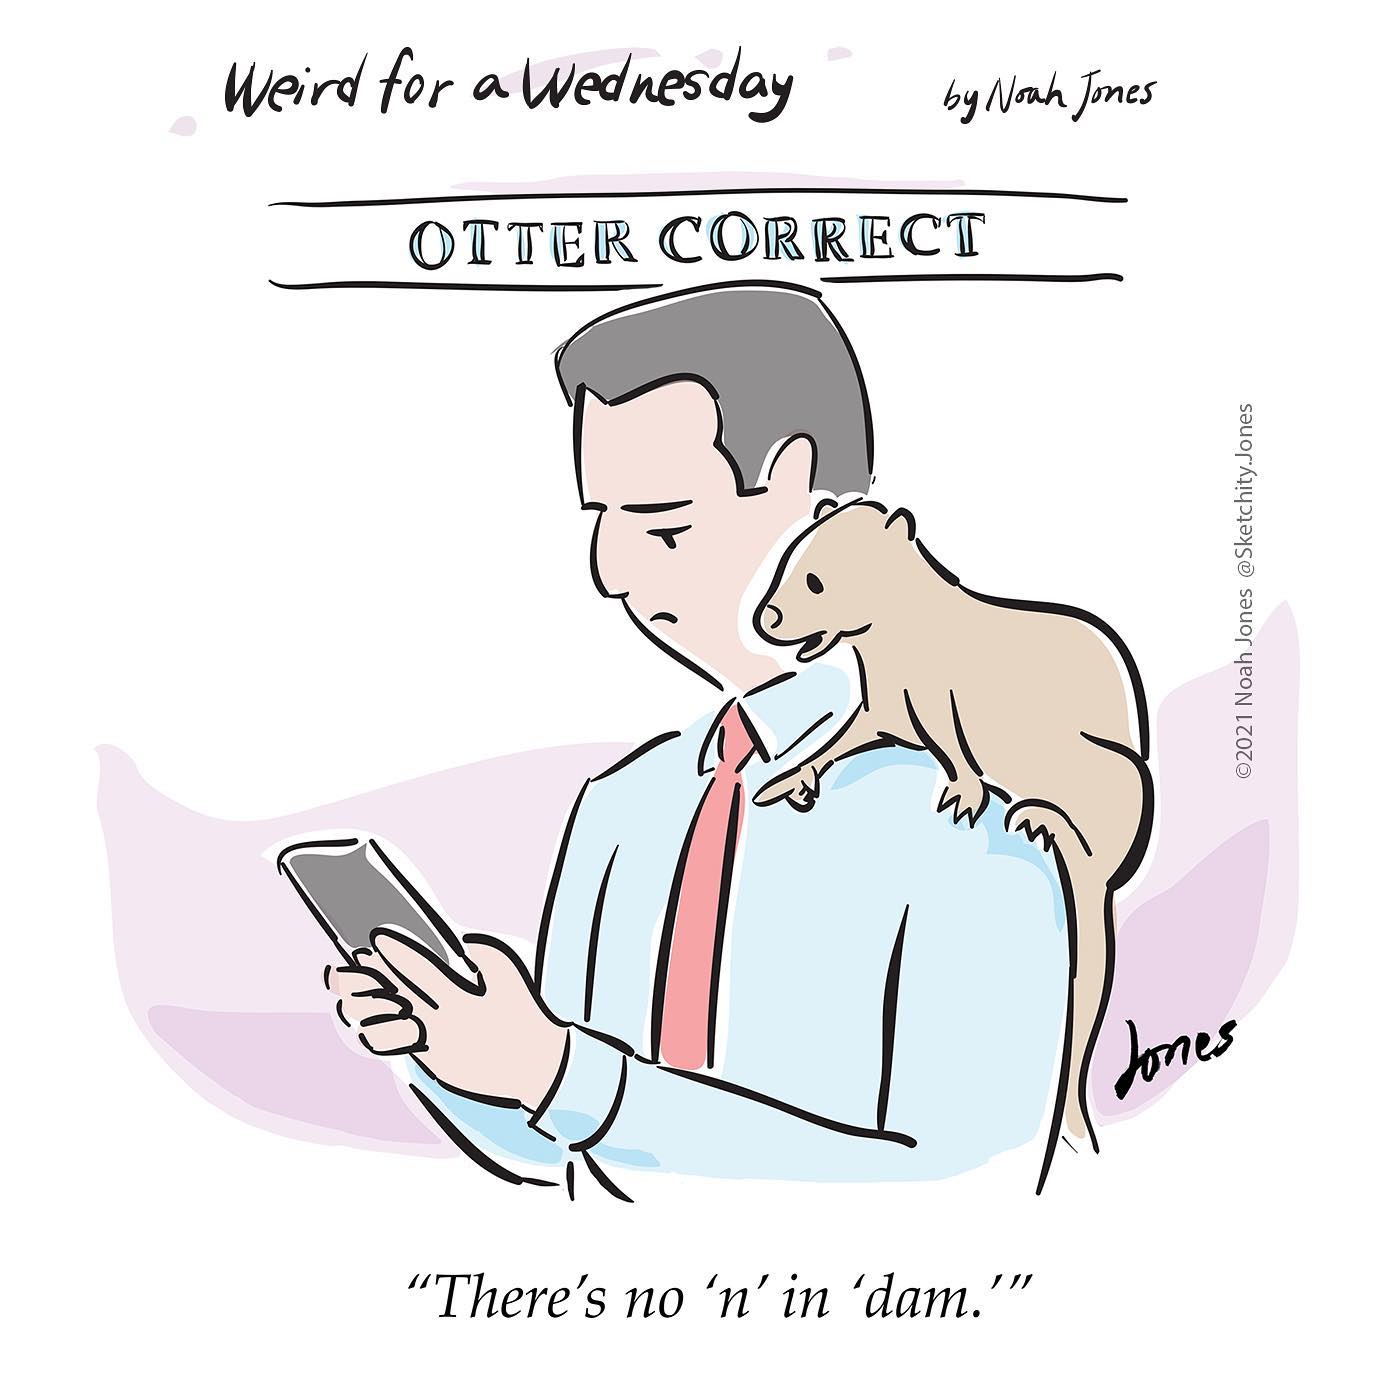 Cartoon with a title "OTTER CORRECT", a man looking at his smart phone with an otter on his shoulder saying "There's no 'n' in 'dam.'"